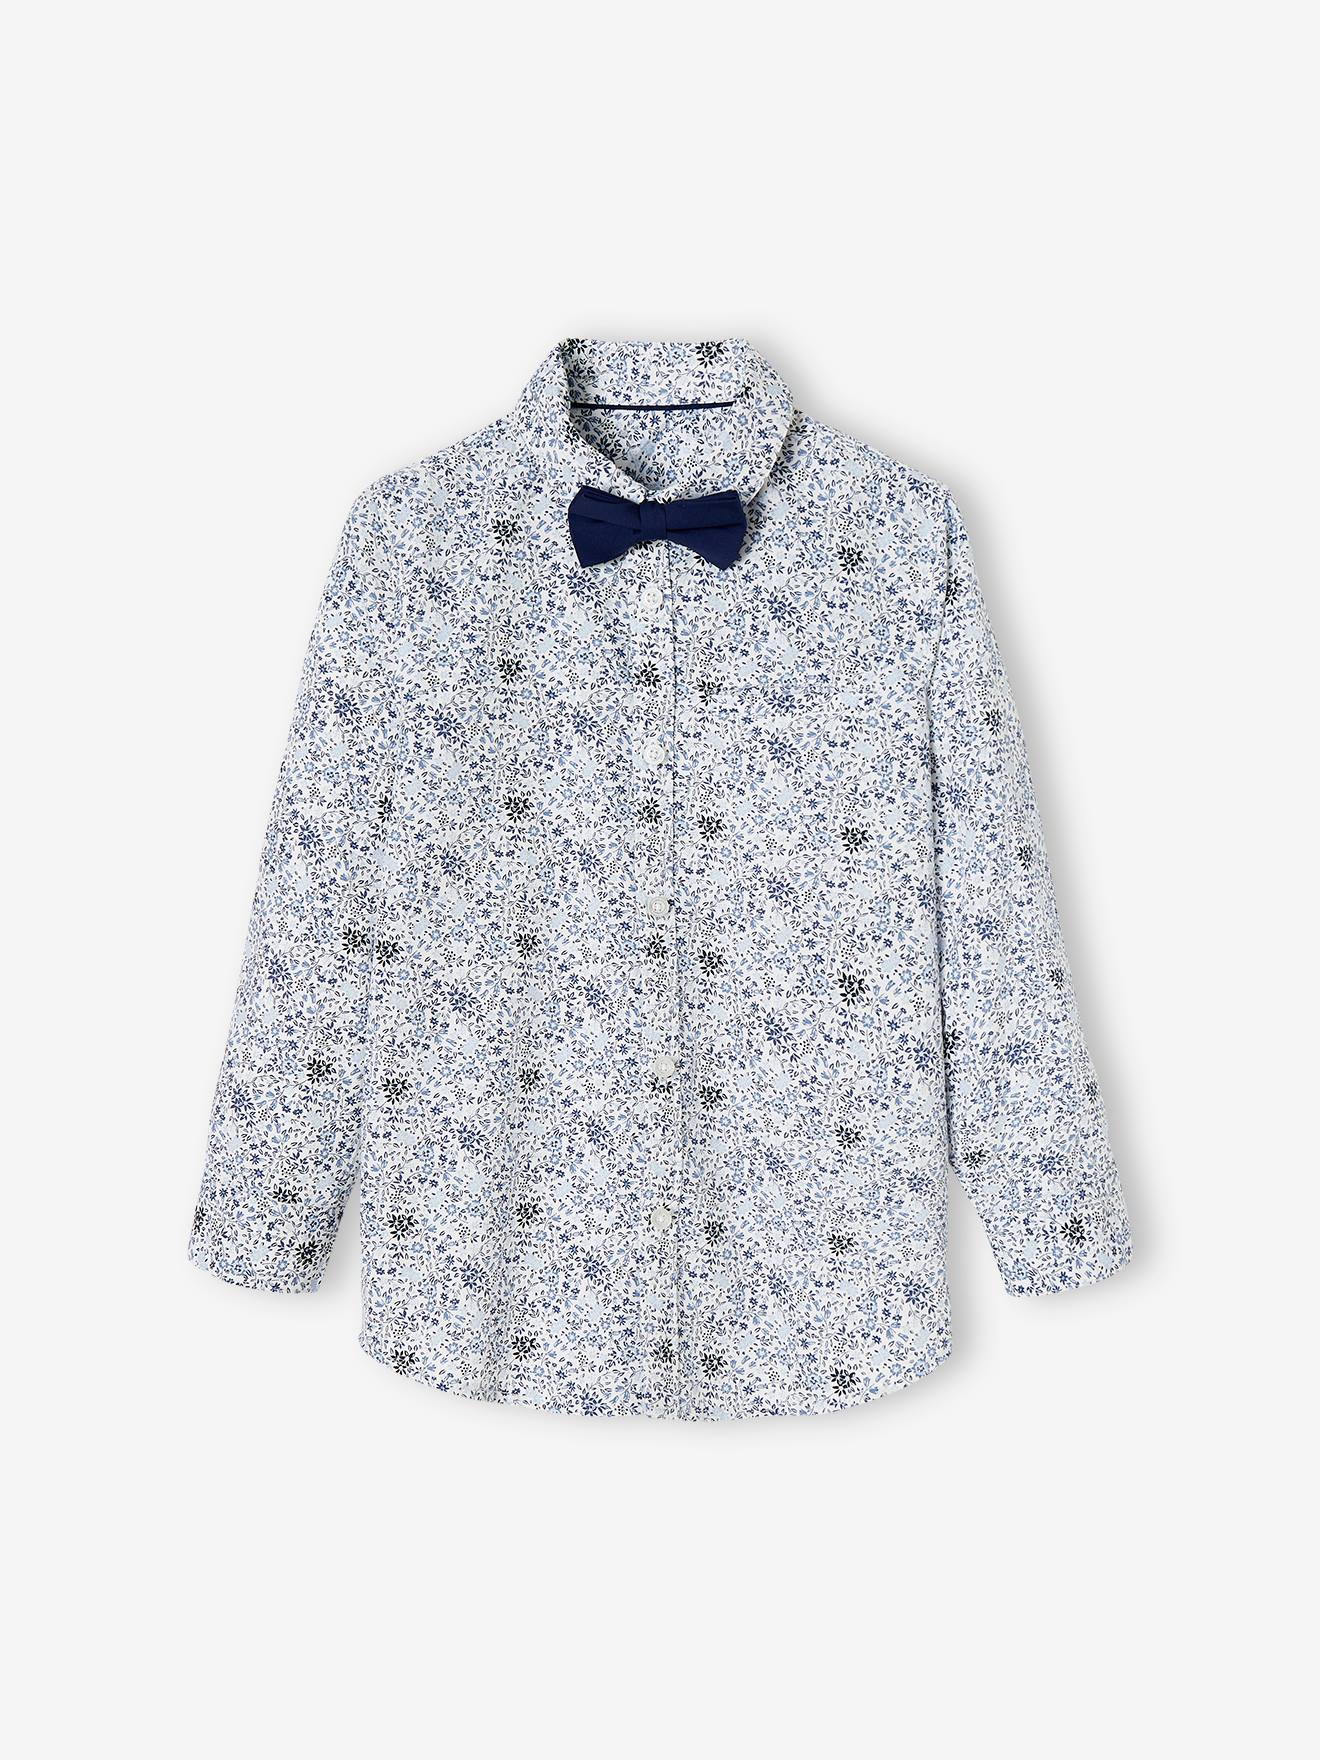 Floral Shirt & Bow Tie, for Boys printed blue